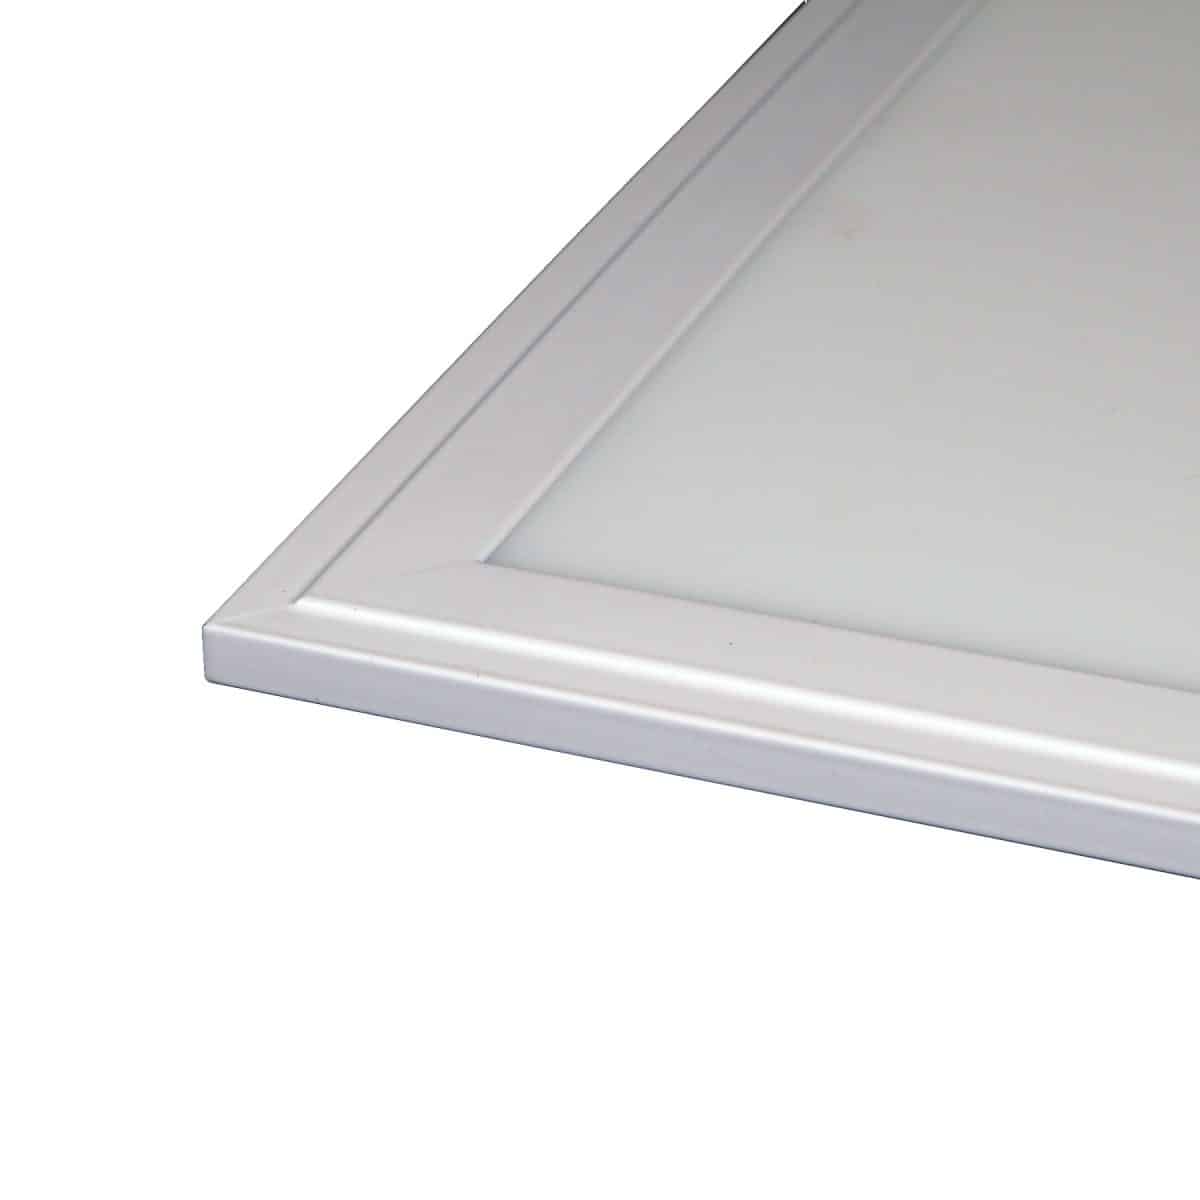 LED Recessed LED Panel 48watt 600mm x 600mm Super Bright Daylight Complete With Driver and a 3 Year Guarantee